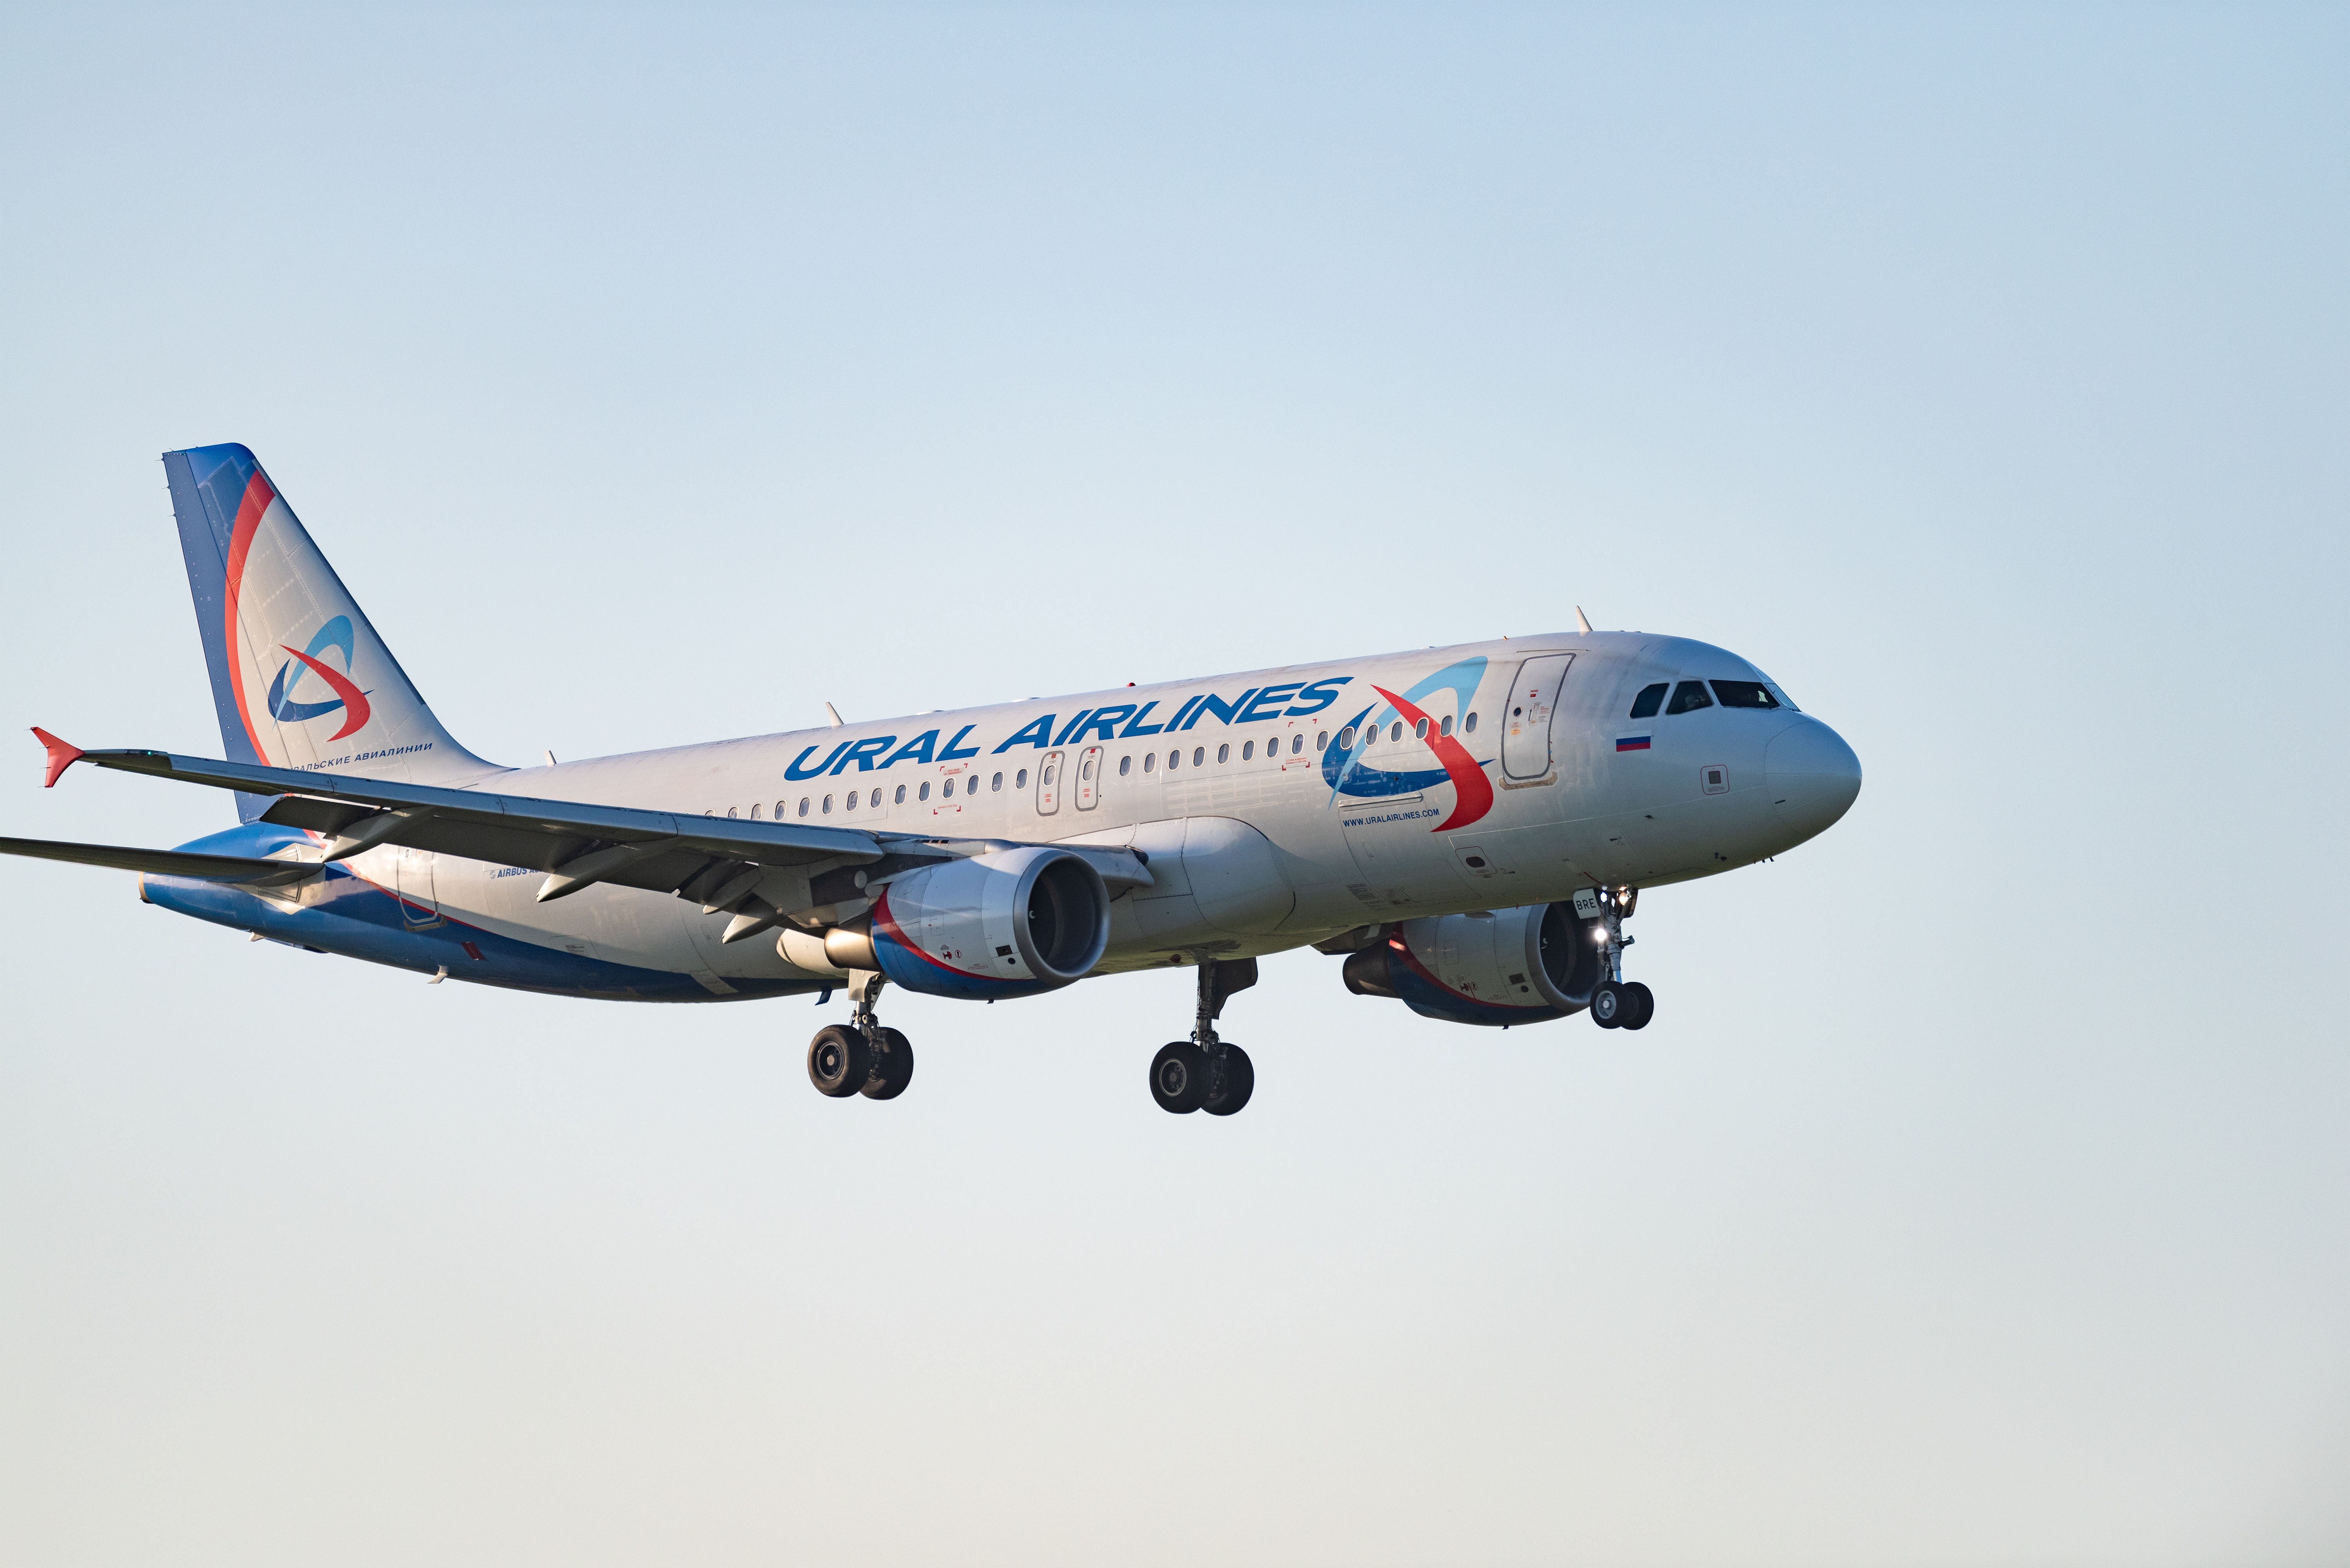 Ural Airlines Airbus A320 landing